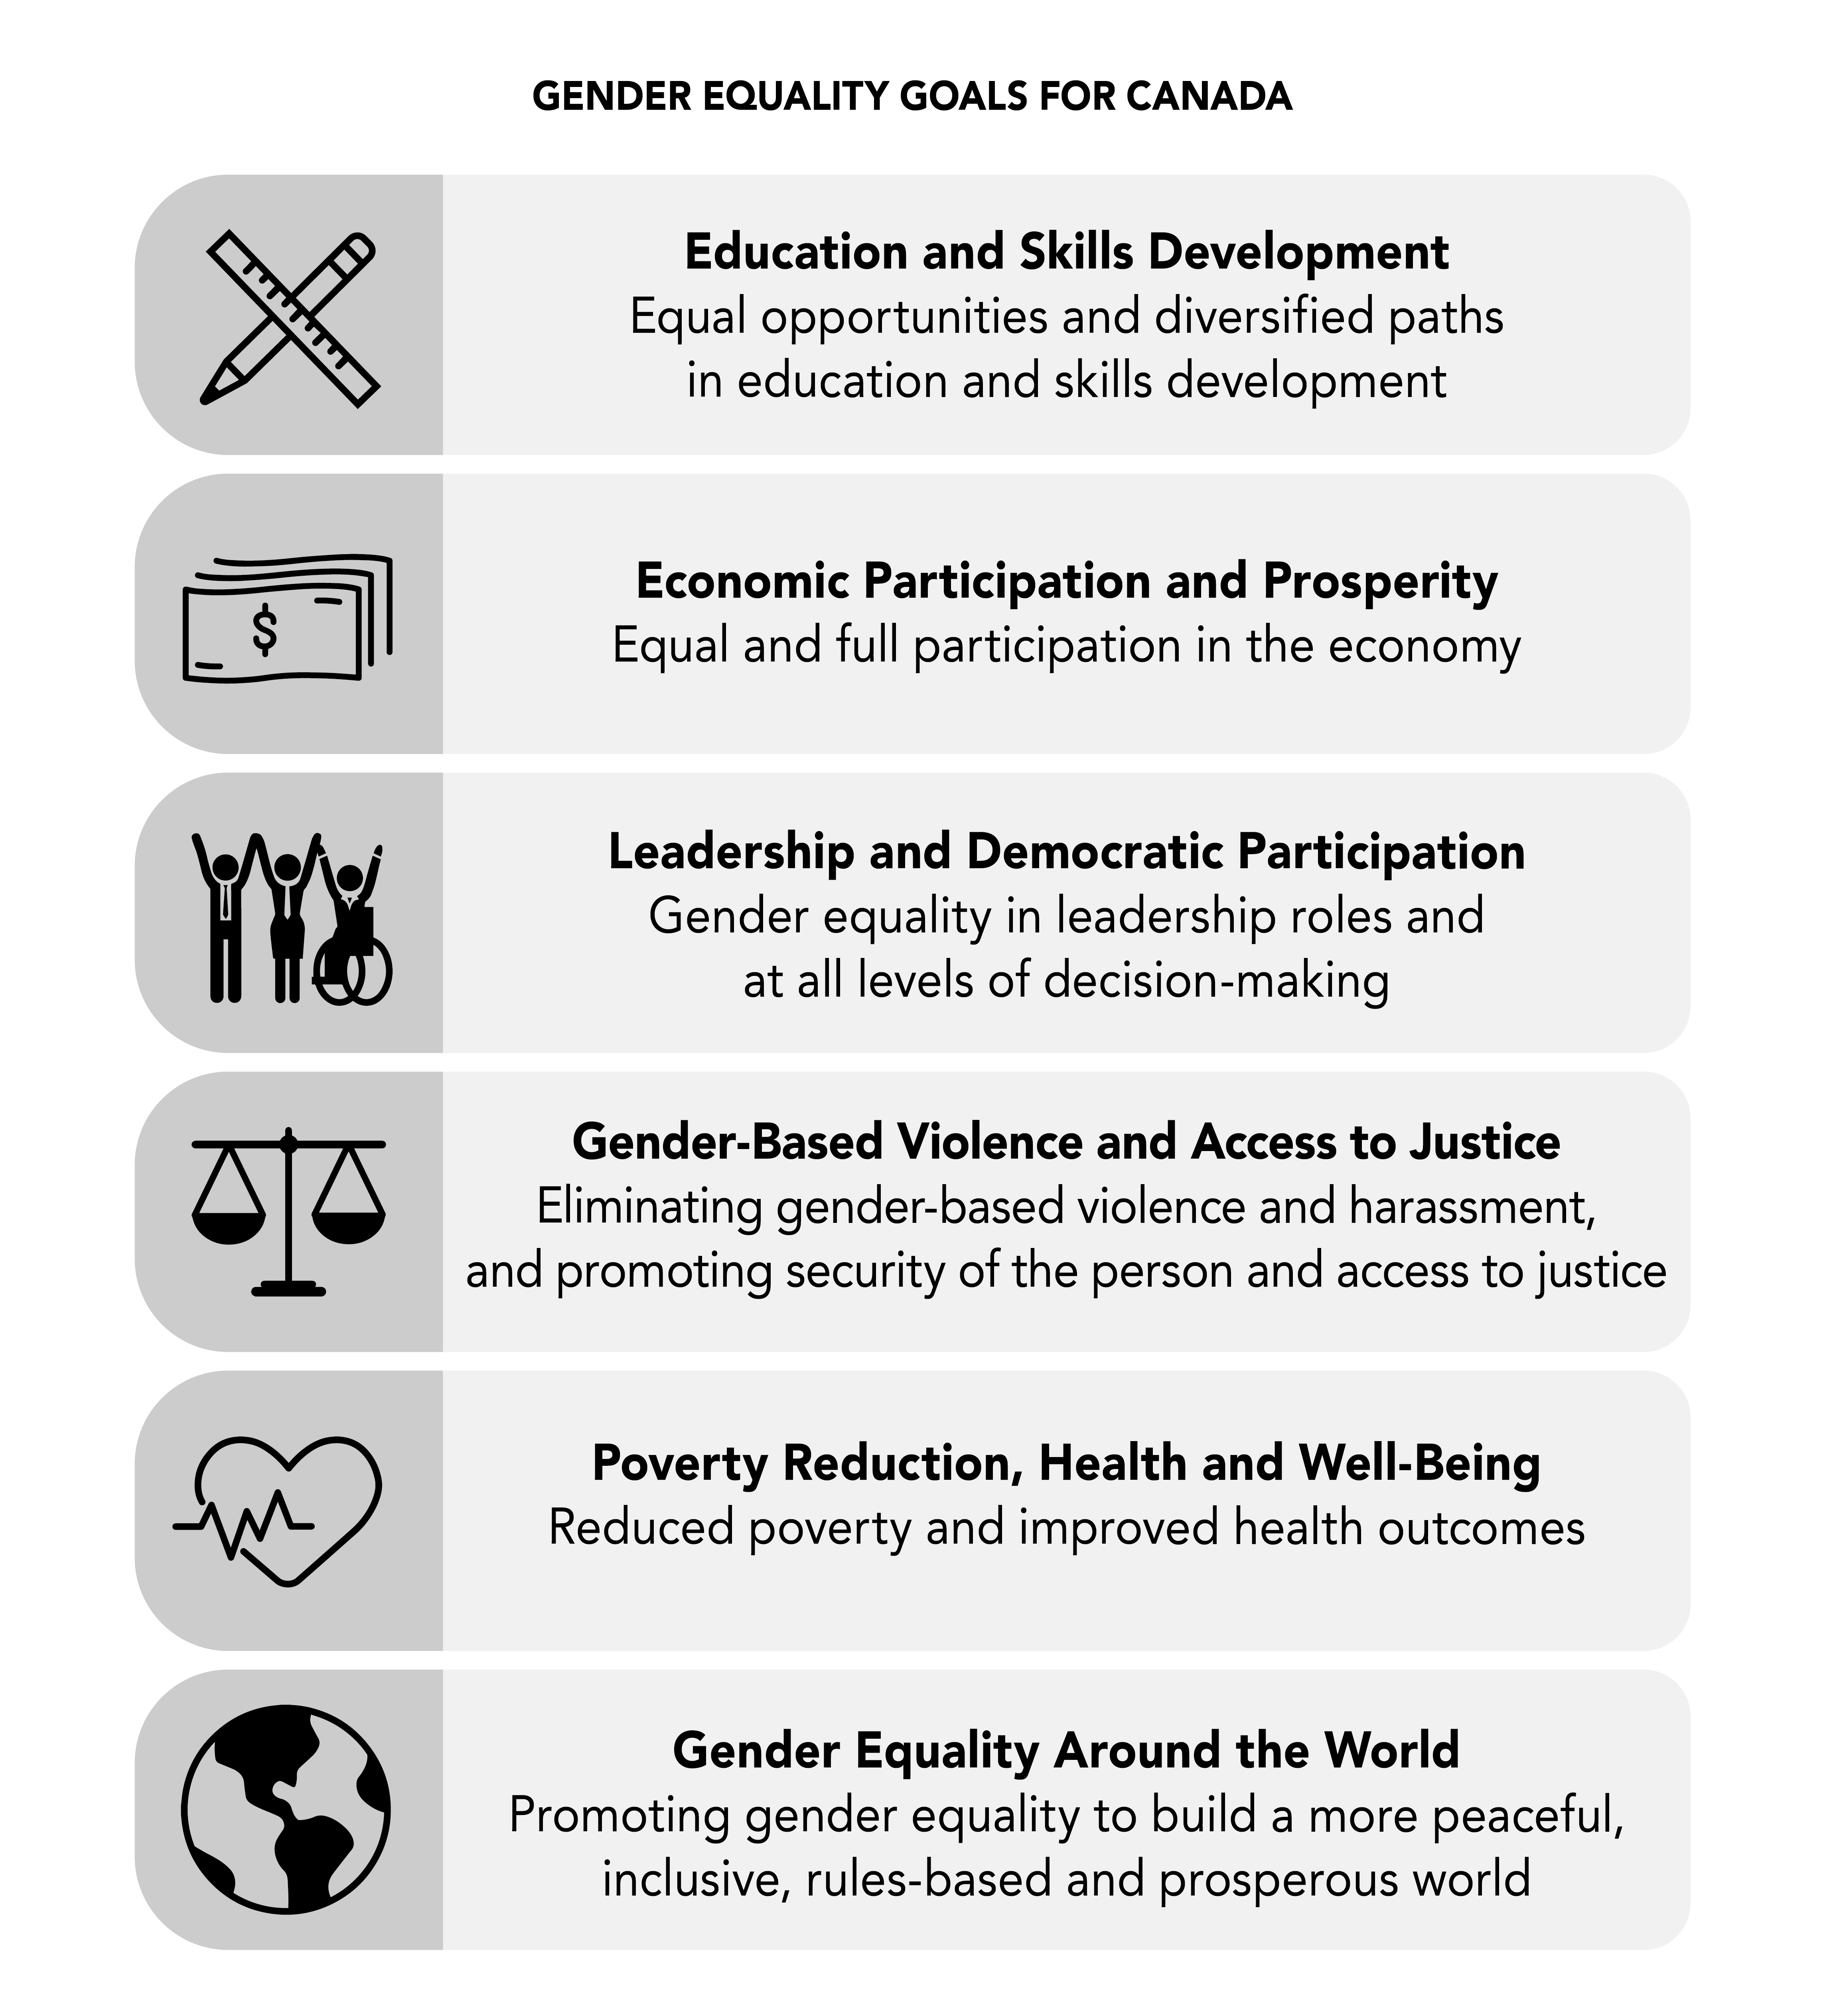 Figure A4.1: Gender Equality Goals for Canada